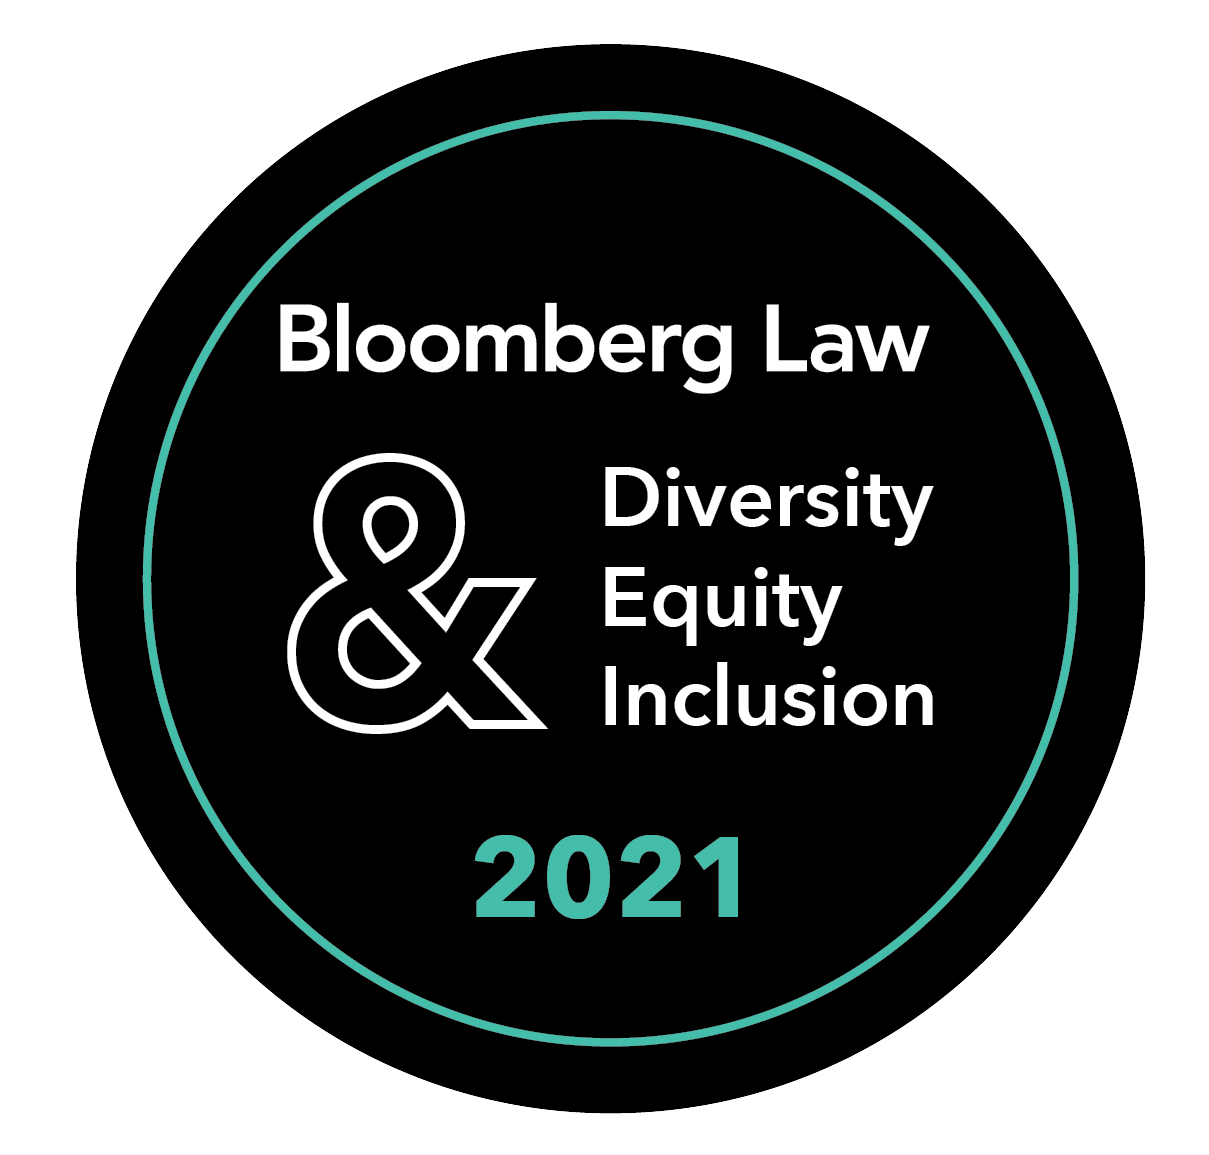 Black Circle with Green Circle Outlined Inside. Text Reads, "Bloomberg Law Diversity, Equity, & Inclusion 2021"